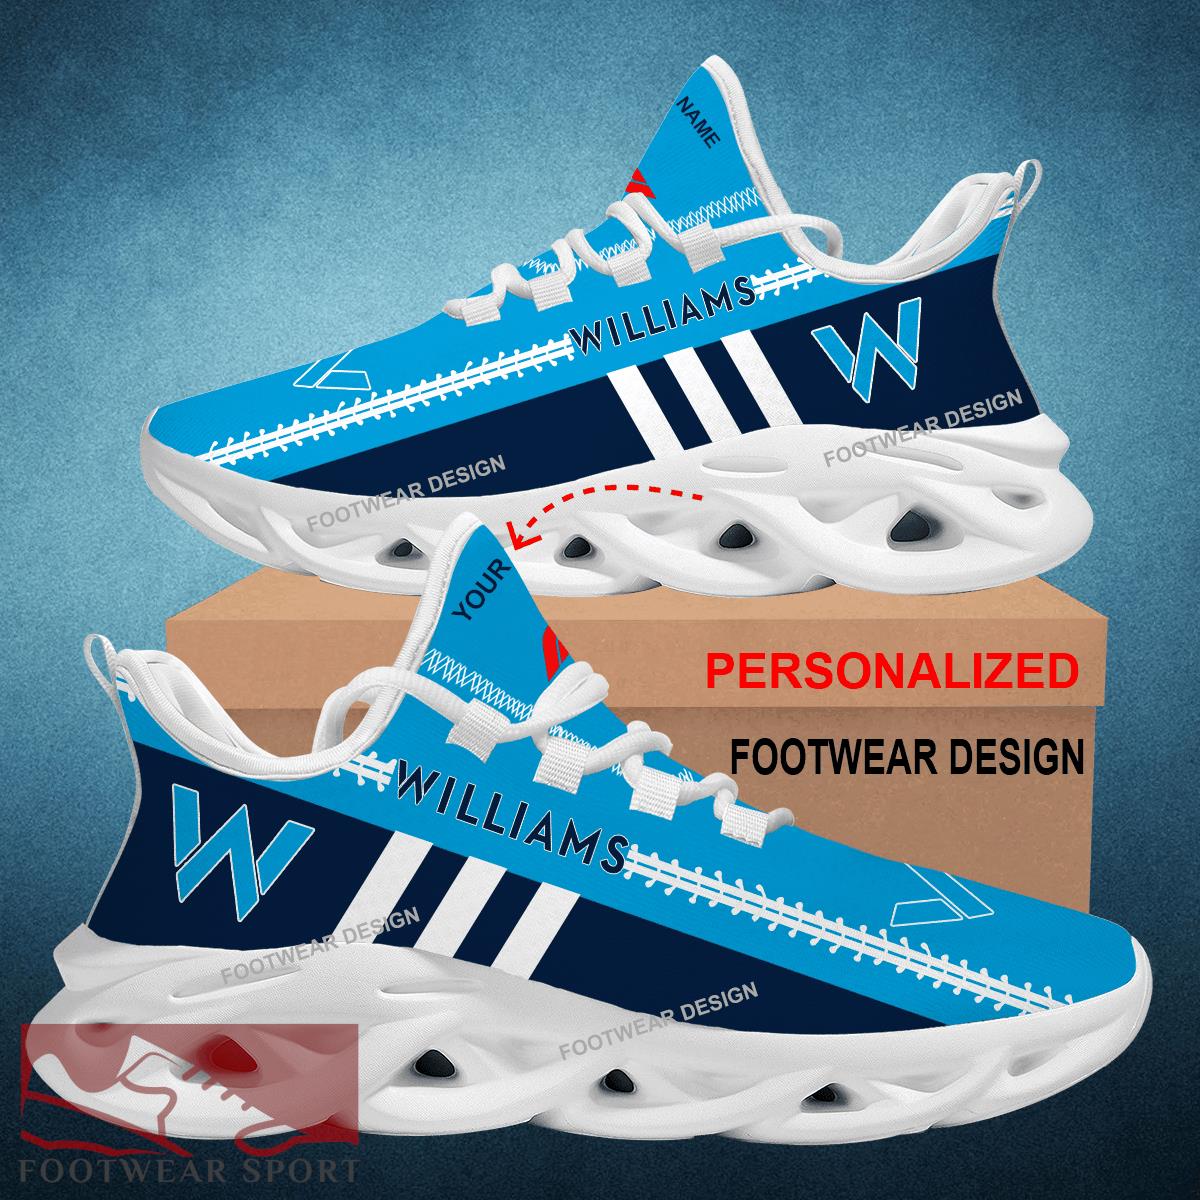 F1 Racing Williams Racing Chunky Shoes New Design Gift Fans Max Soul Sneakers Personalized - F1 Racing Williams Racing Logo New Chunky Shoes Photo 2